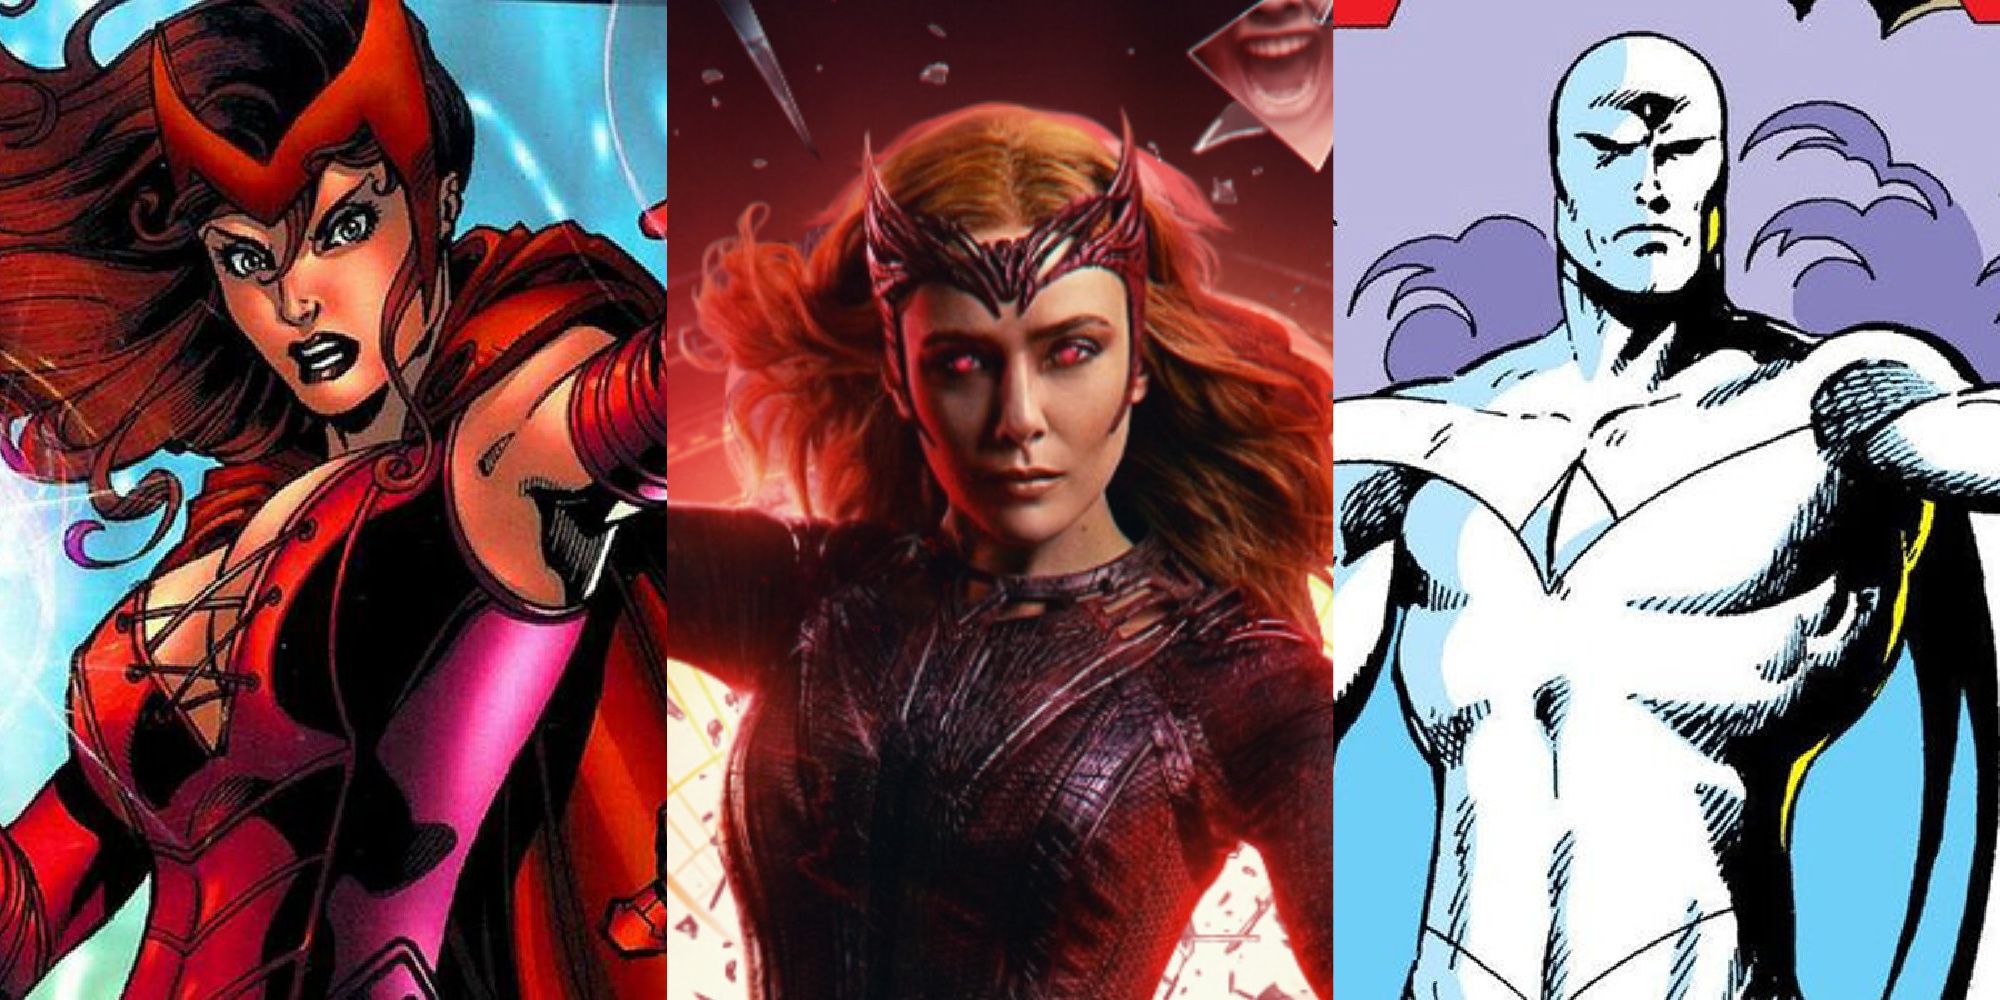 Wanda Maximoff / Scarlet Witch: the comic book history of her powers